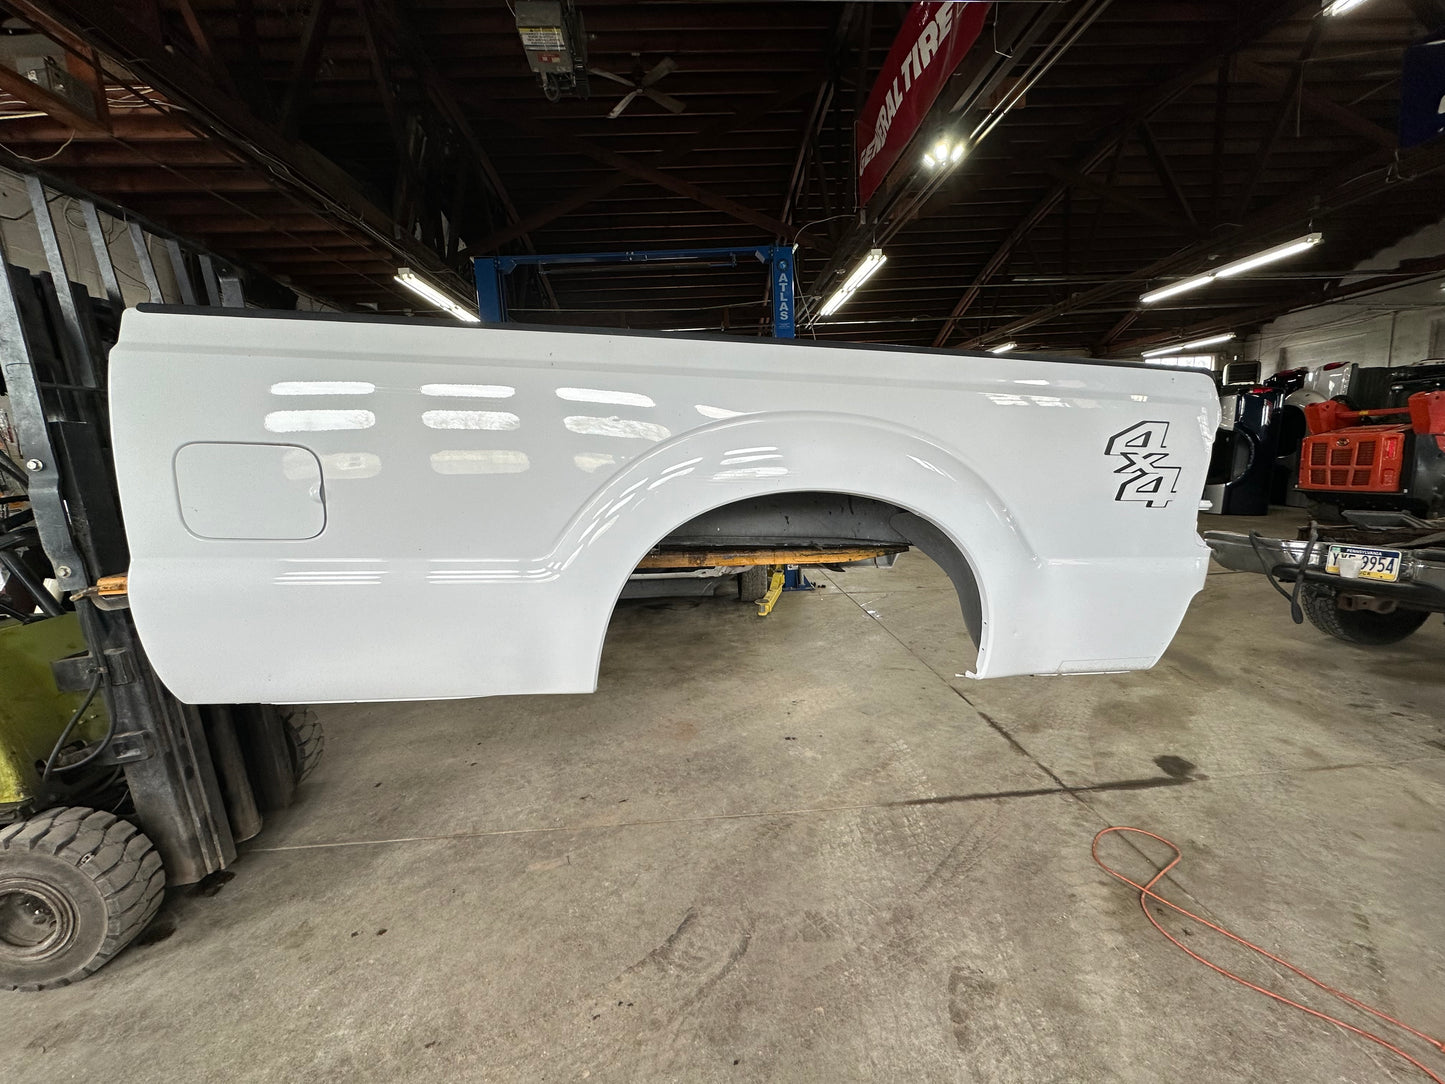 2011-2016 Superduty 8’ bed Oxford white #12592